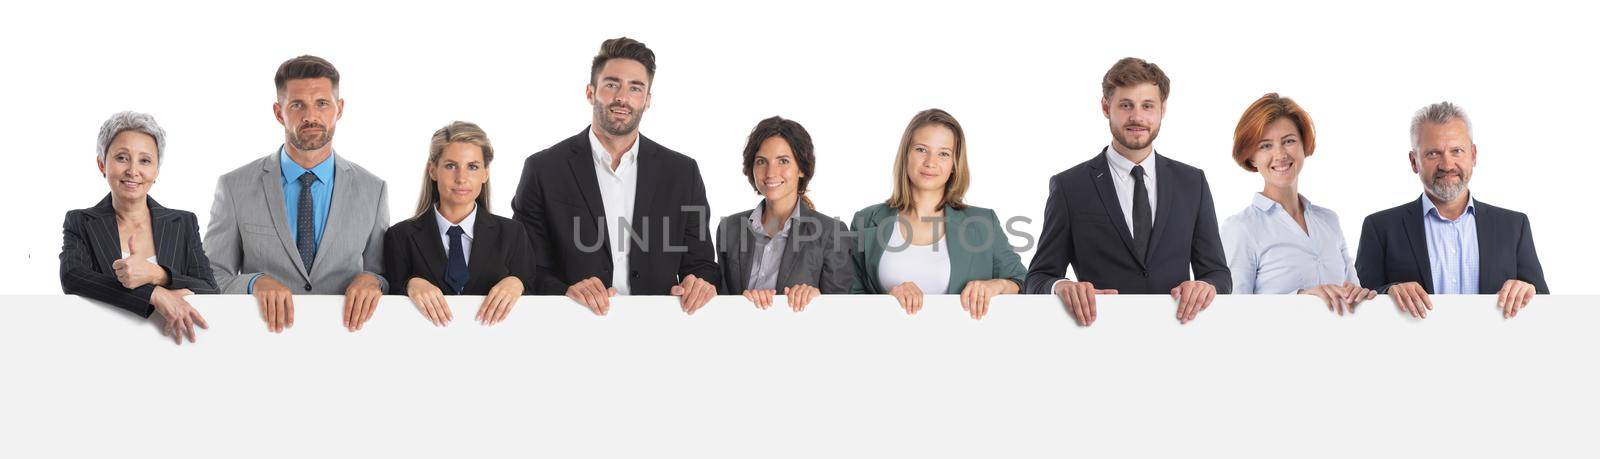 Business people team holding blank banner sign isolated over white background, copy space for text